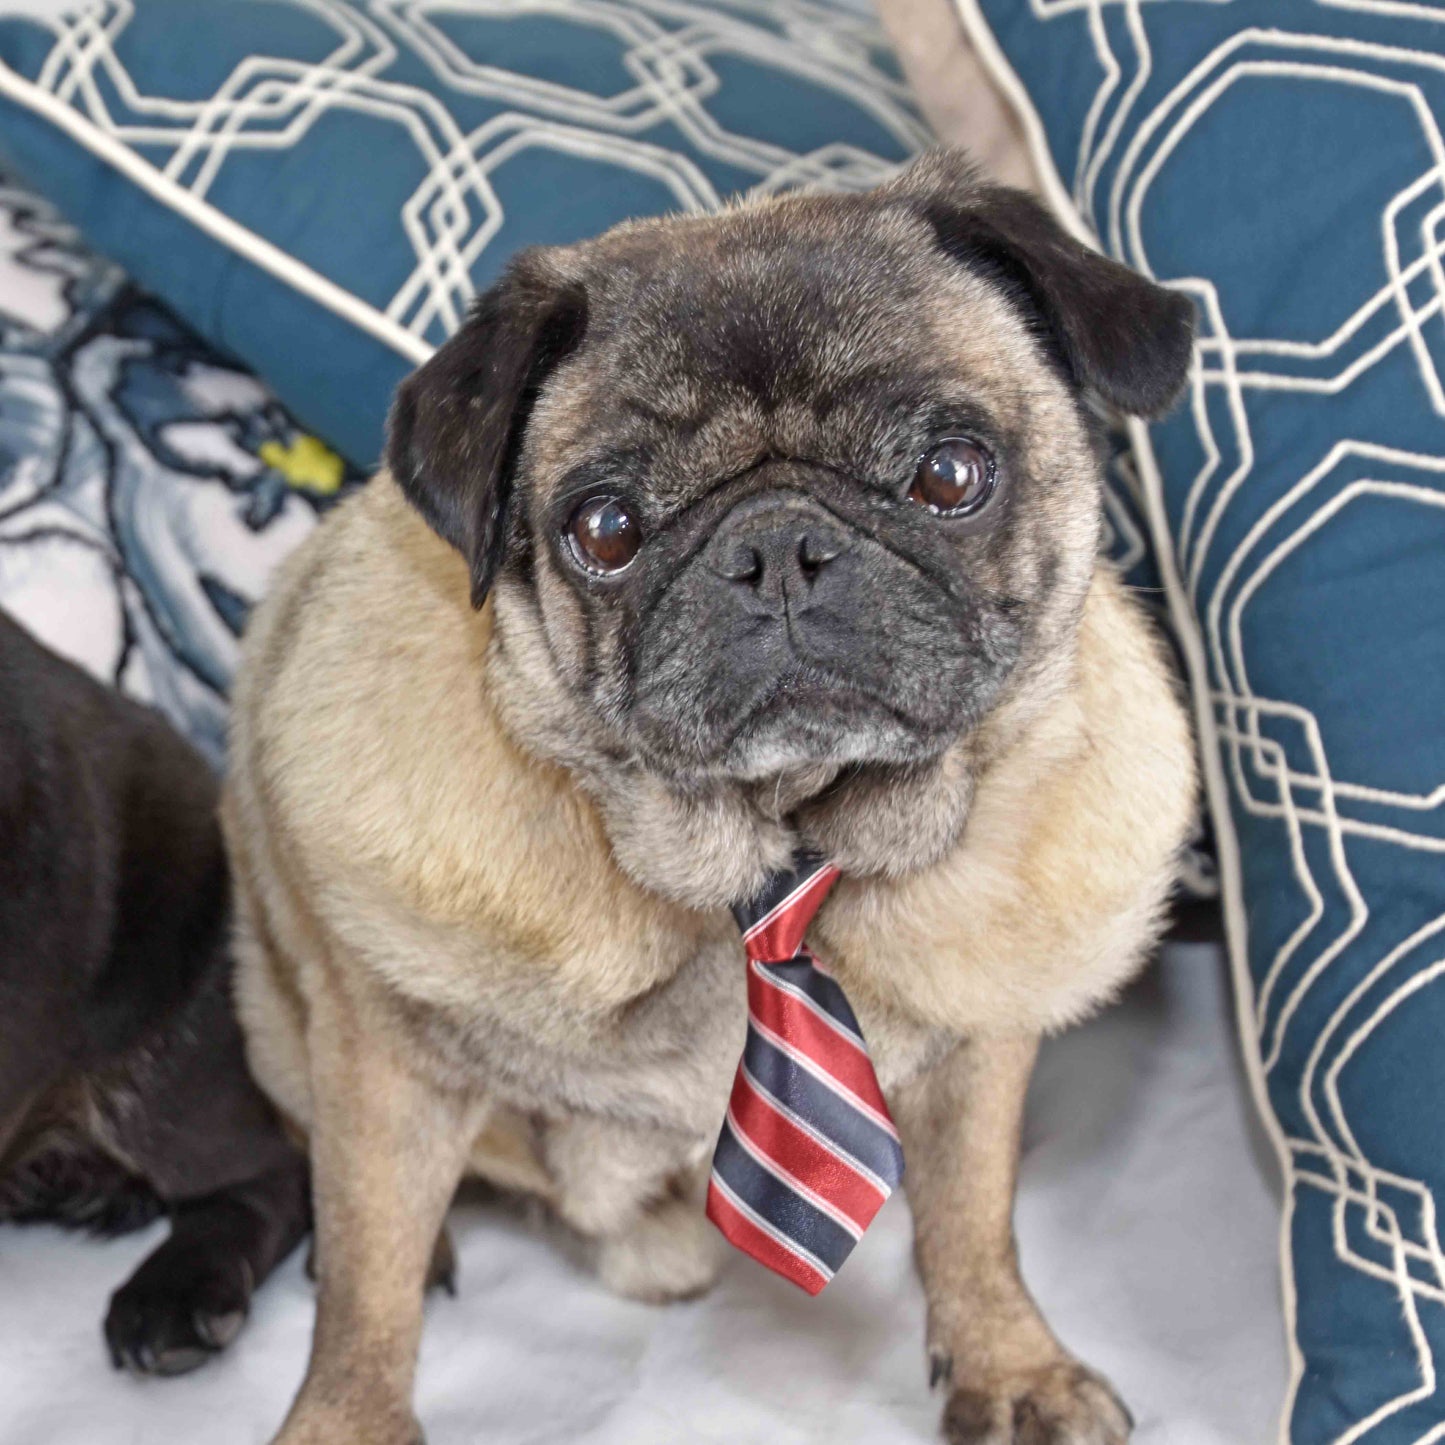 A fawn pug wearing a blue and red stripe necktie